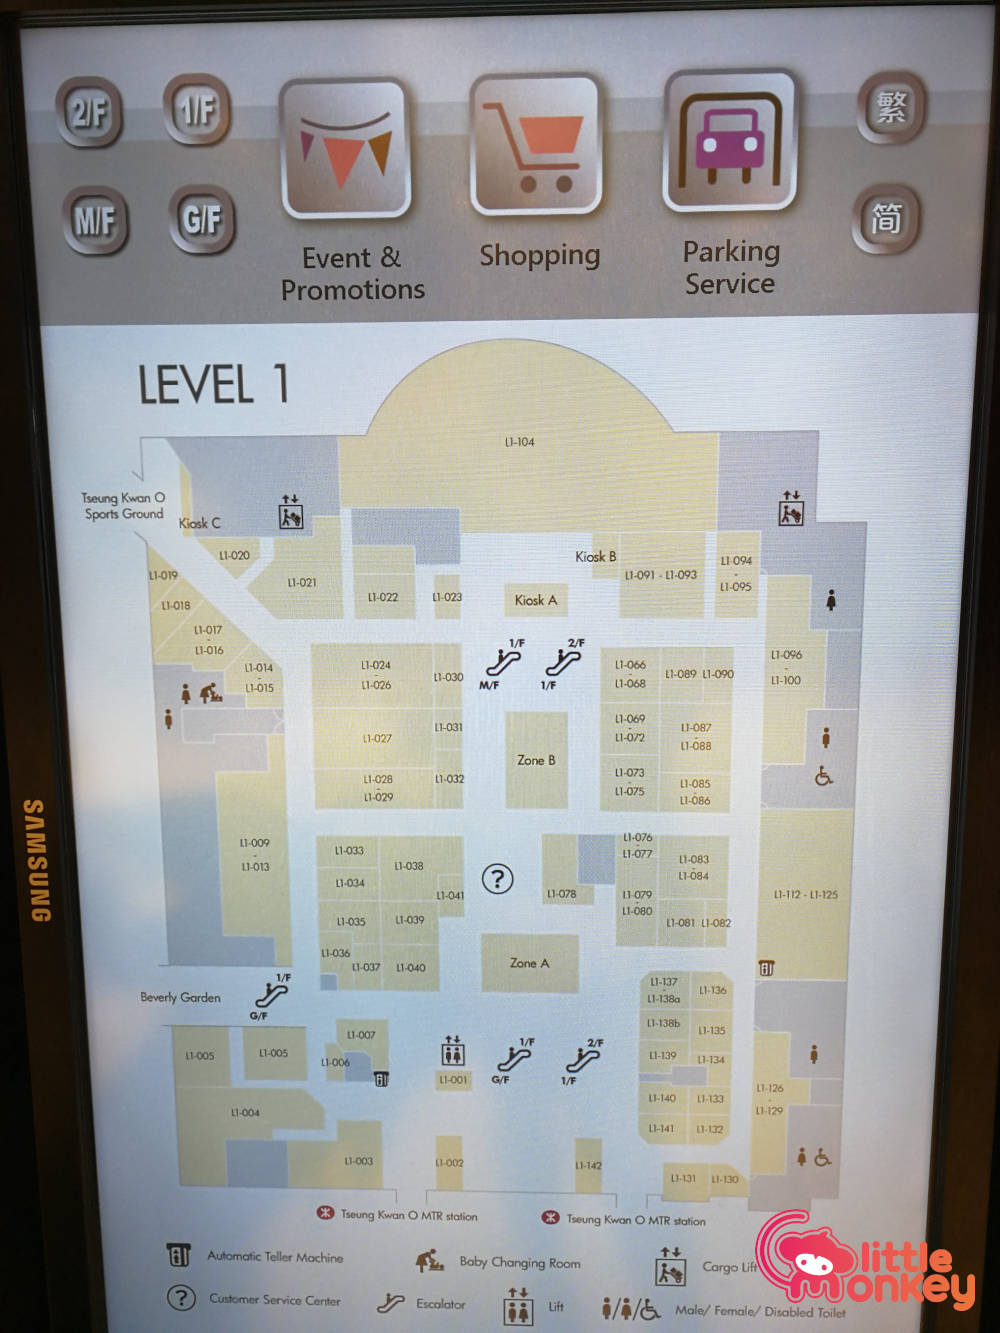 1st level store directory and map in Tseung Kwan O Plaza